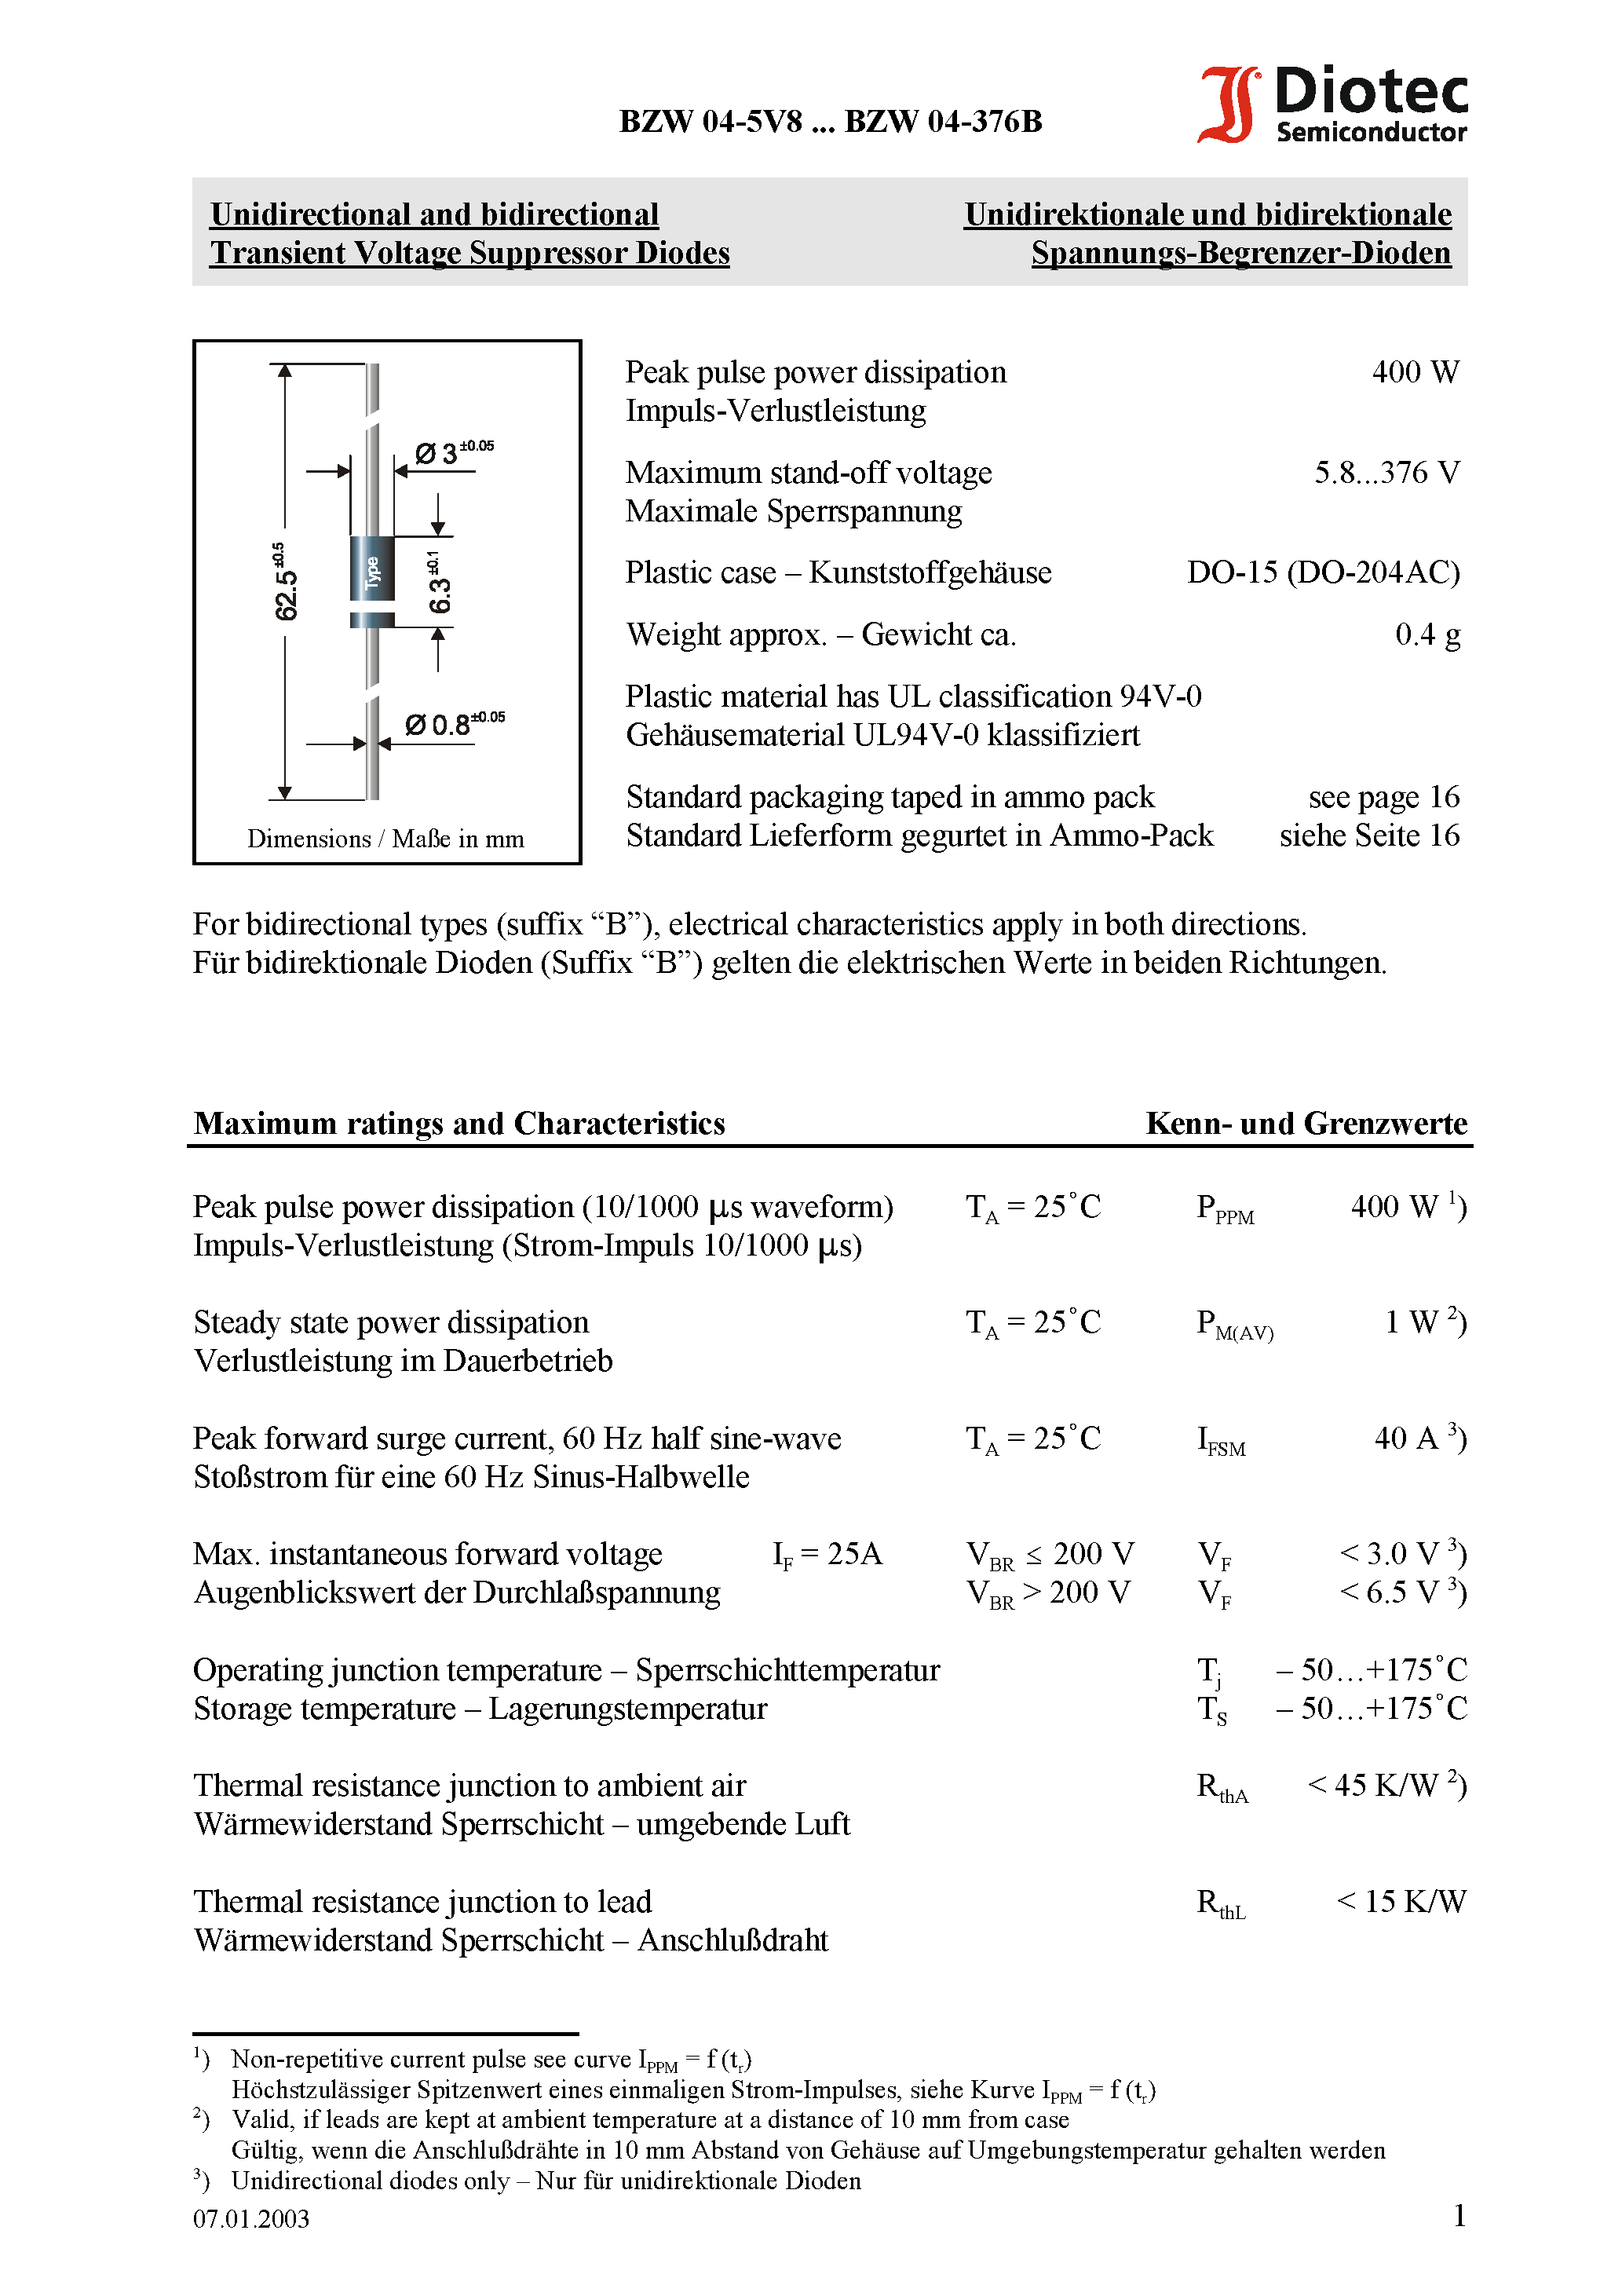 Datasheet BZW04-11 - Unidirectional and bidirectional Transient Voltage Suppressor Diodes page 1